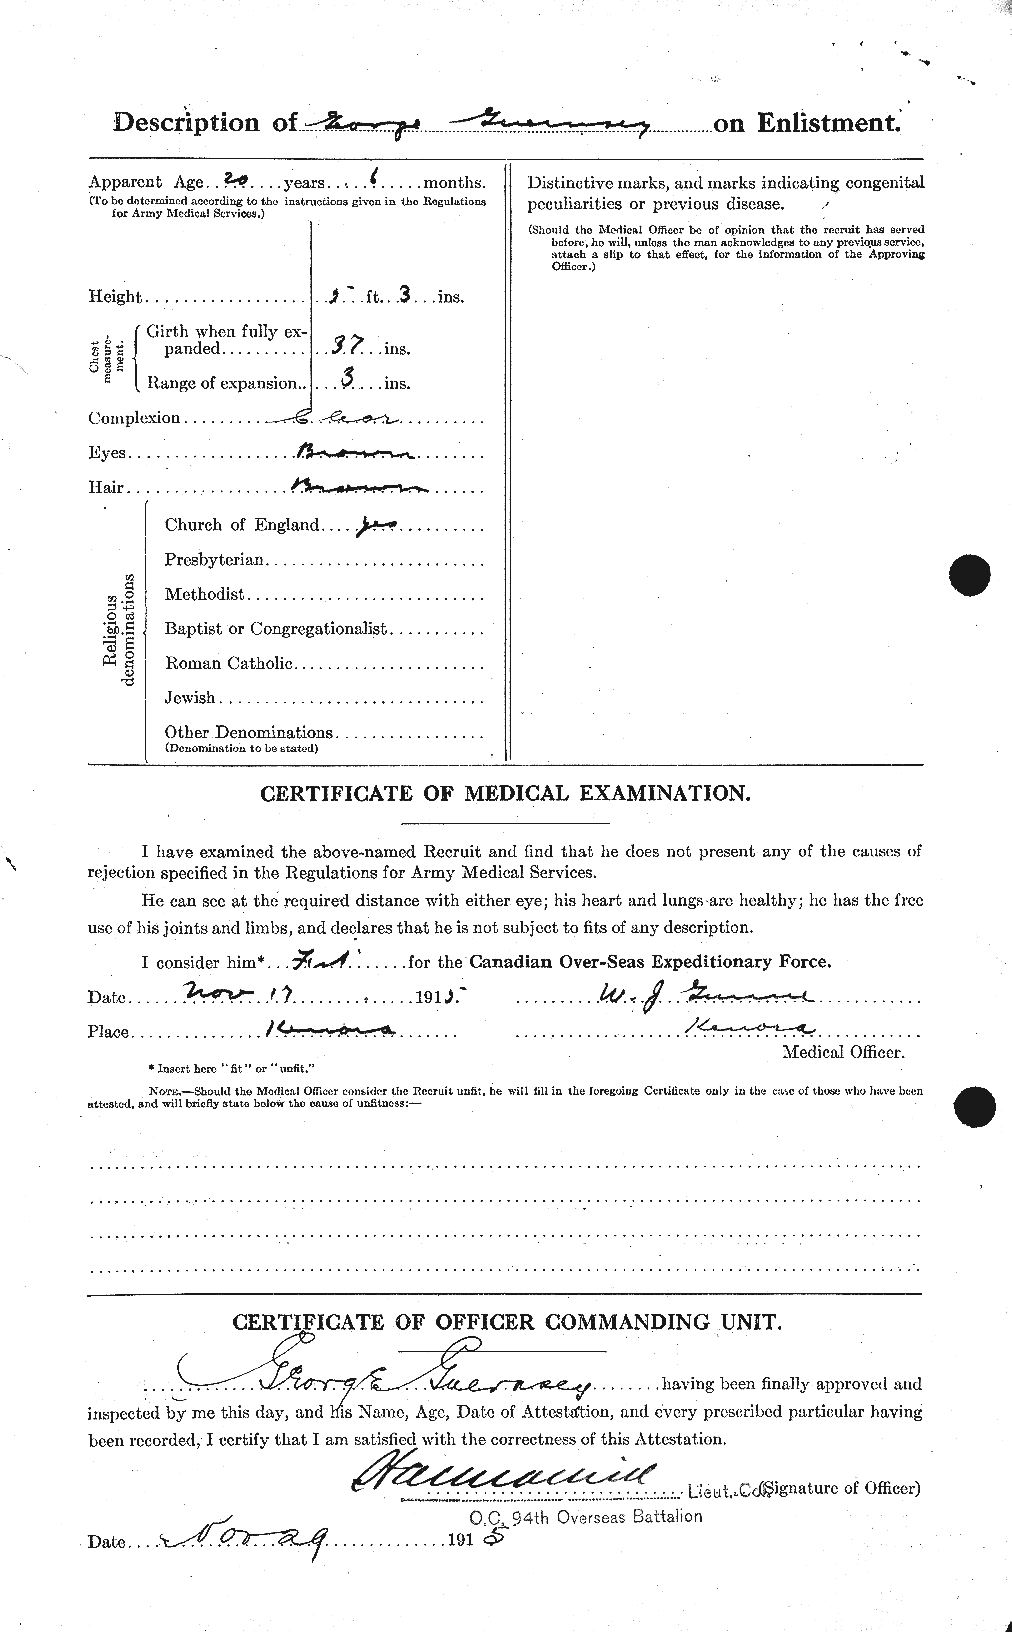 Personnel Records of the First World War - CEF 369728b